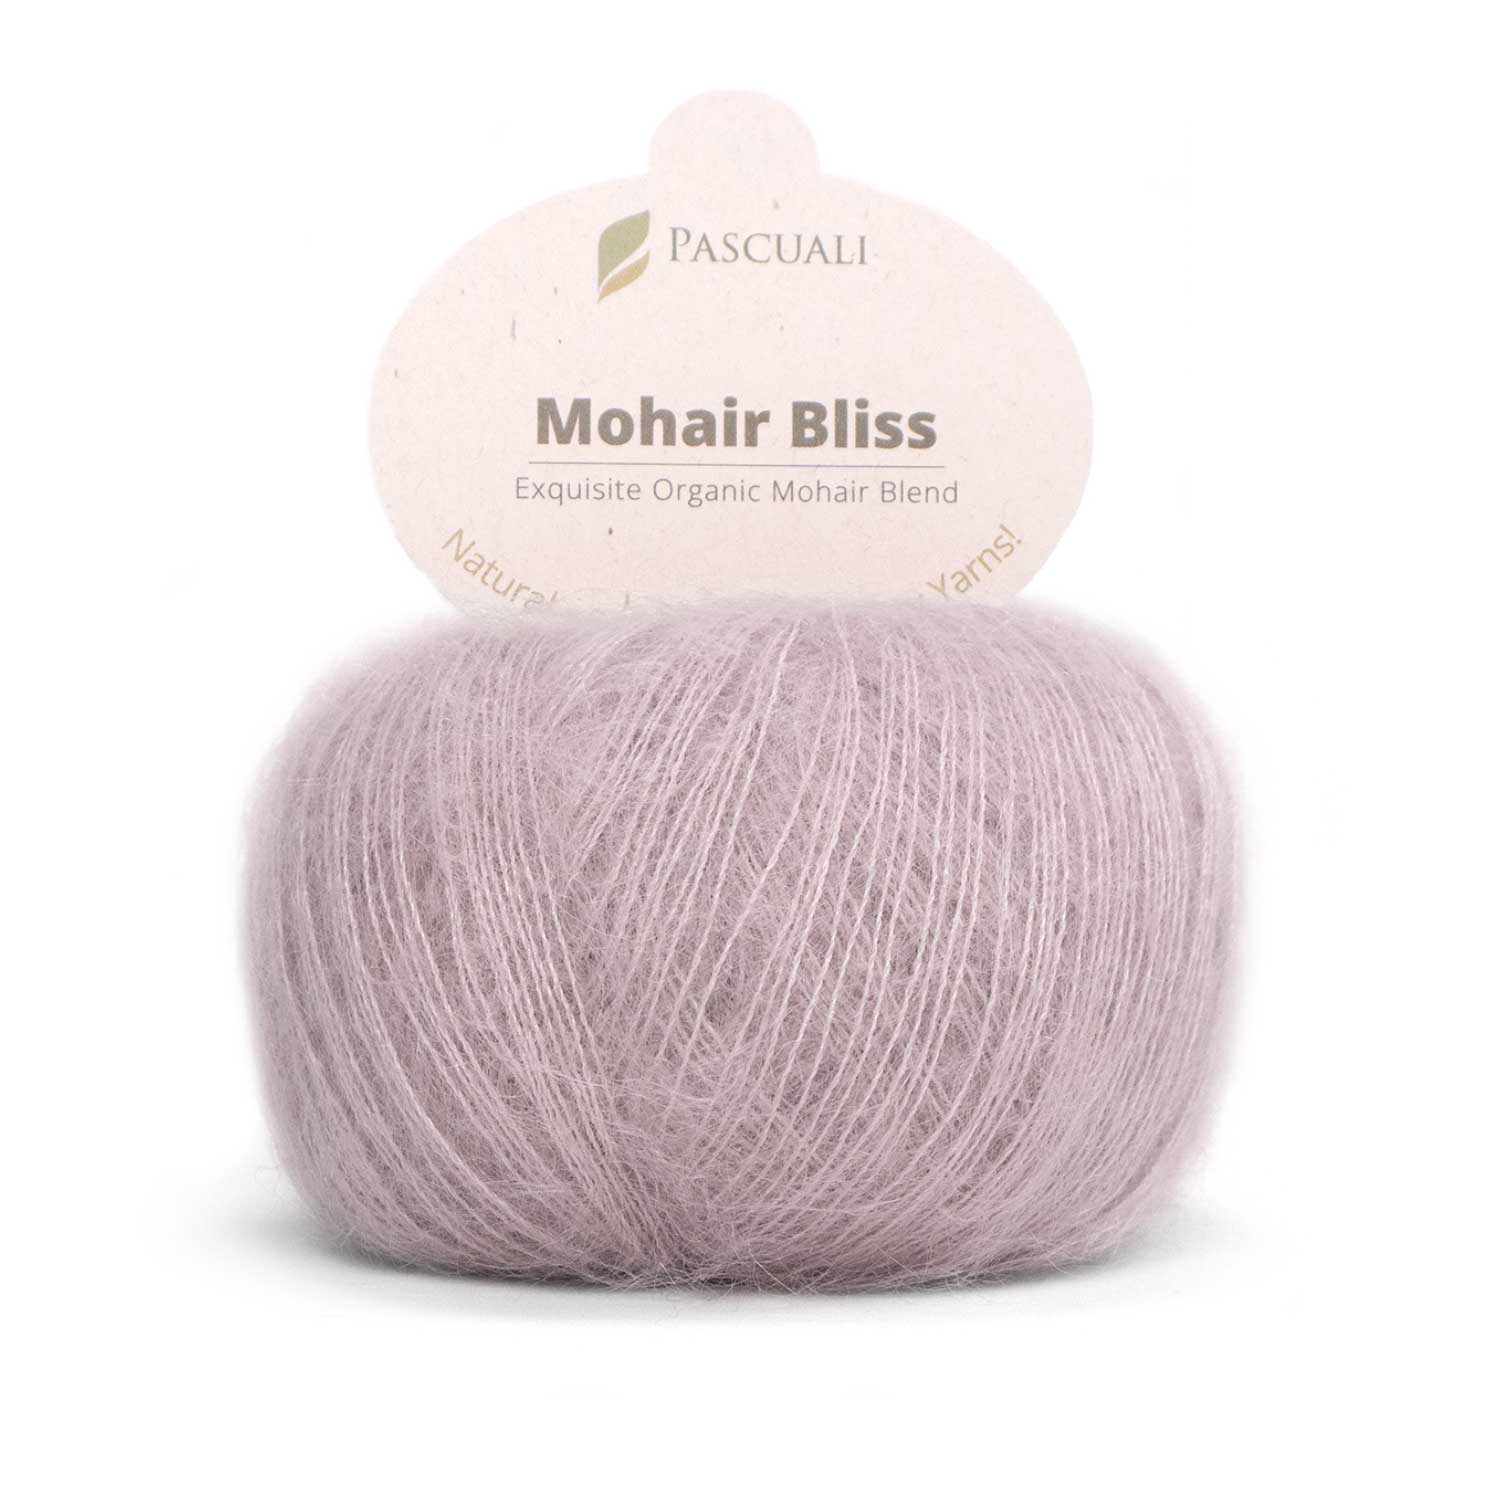 MOHAIR BLISS - Pascuali